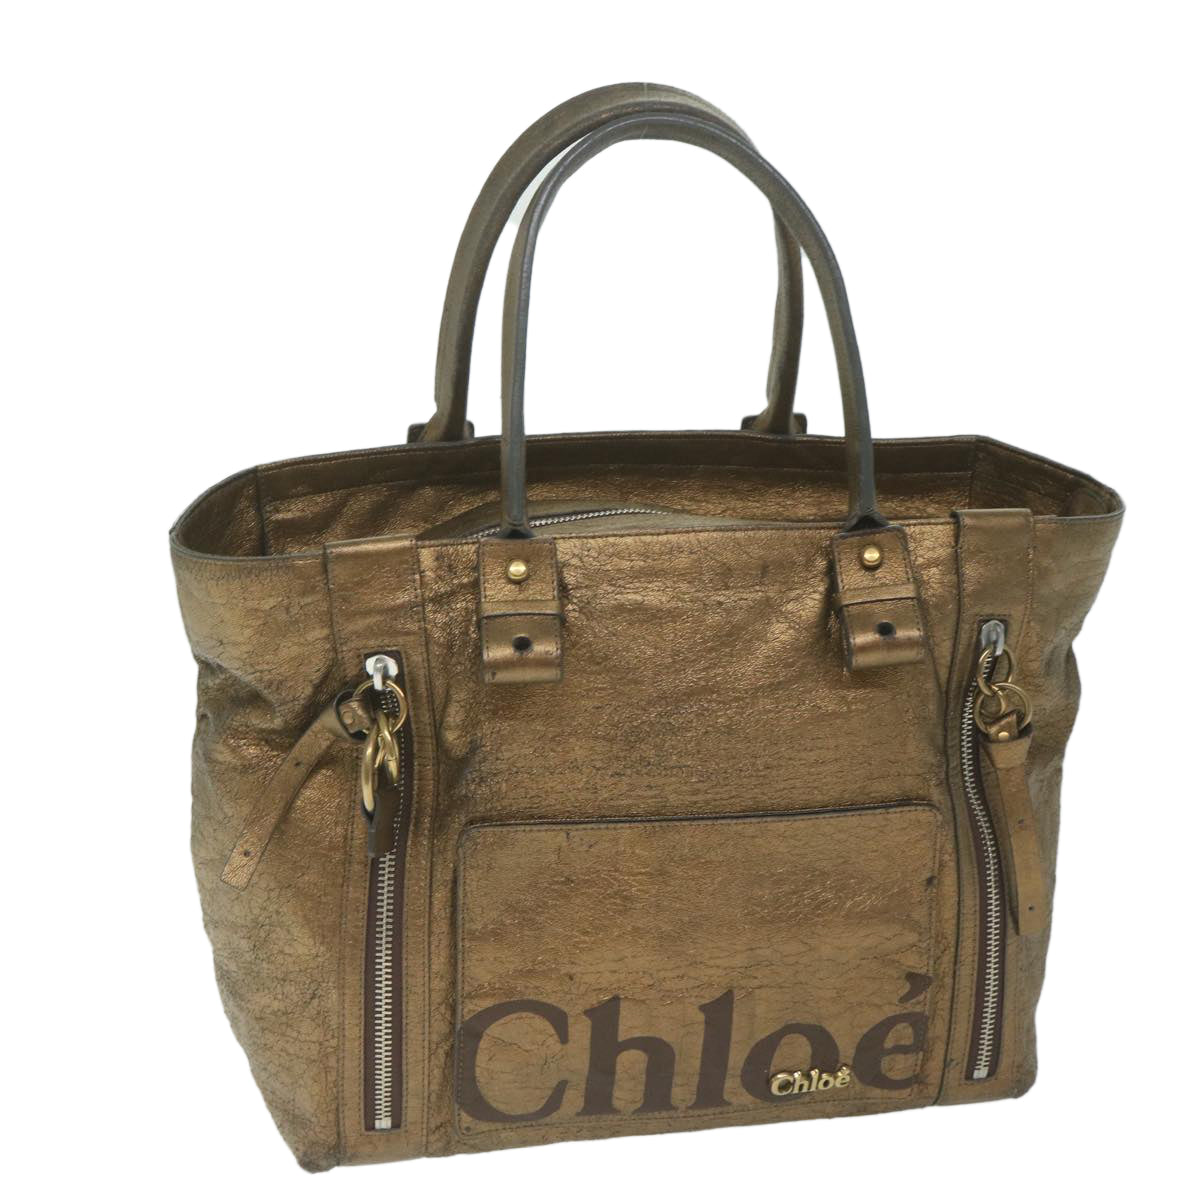 Chloe Eclipse Tote Bag Leather Gold Tone Auth tb992